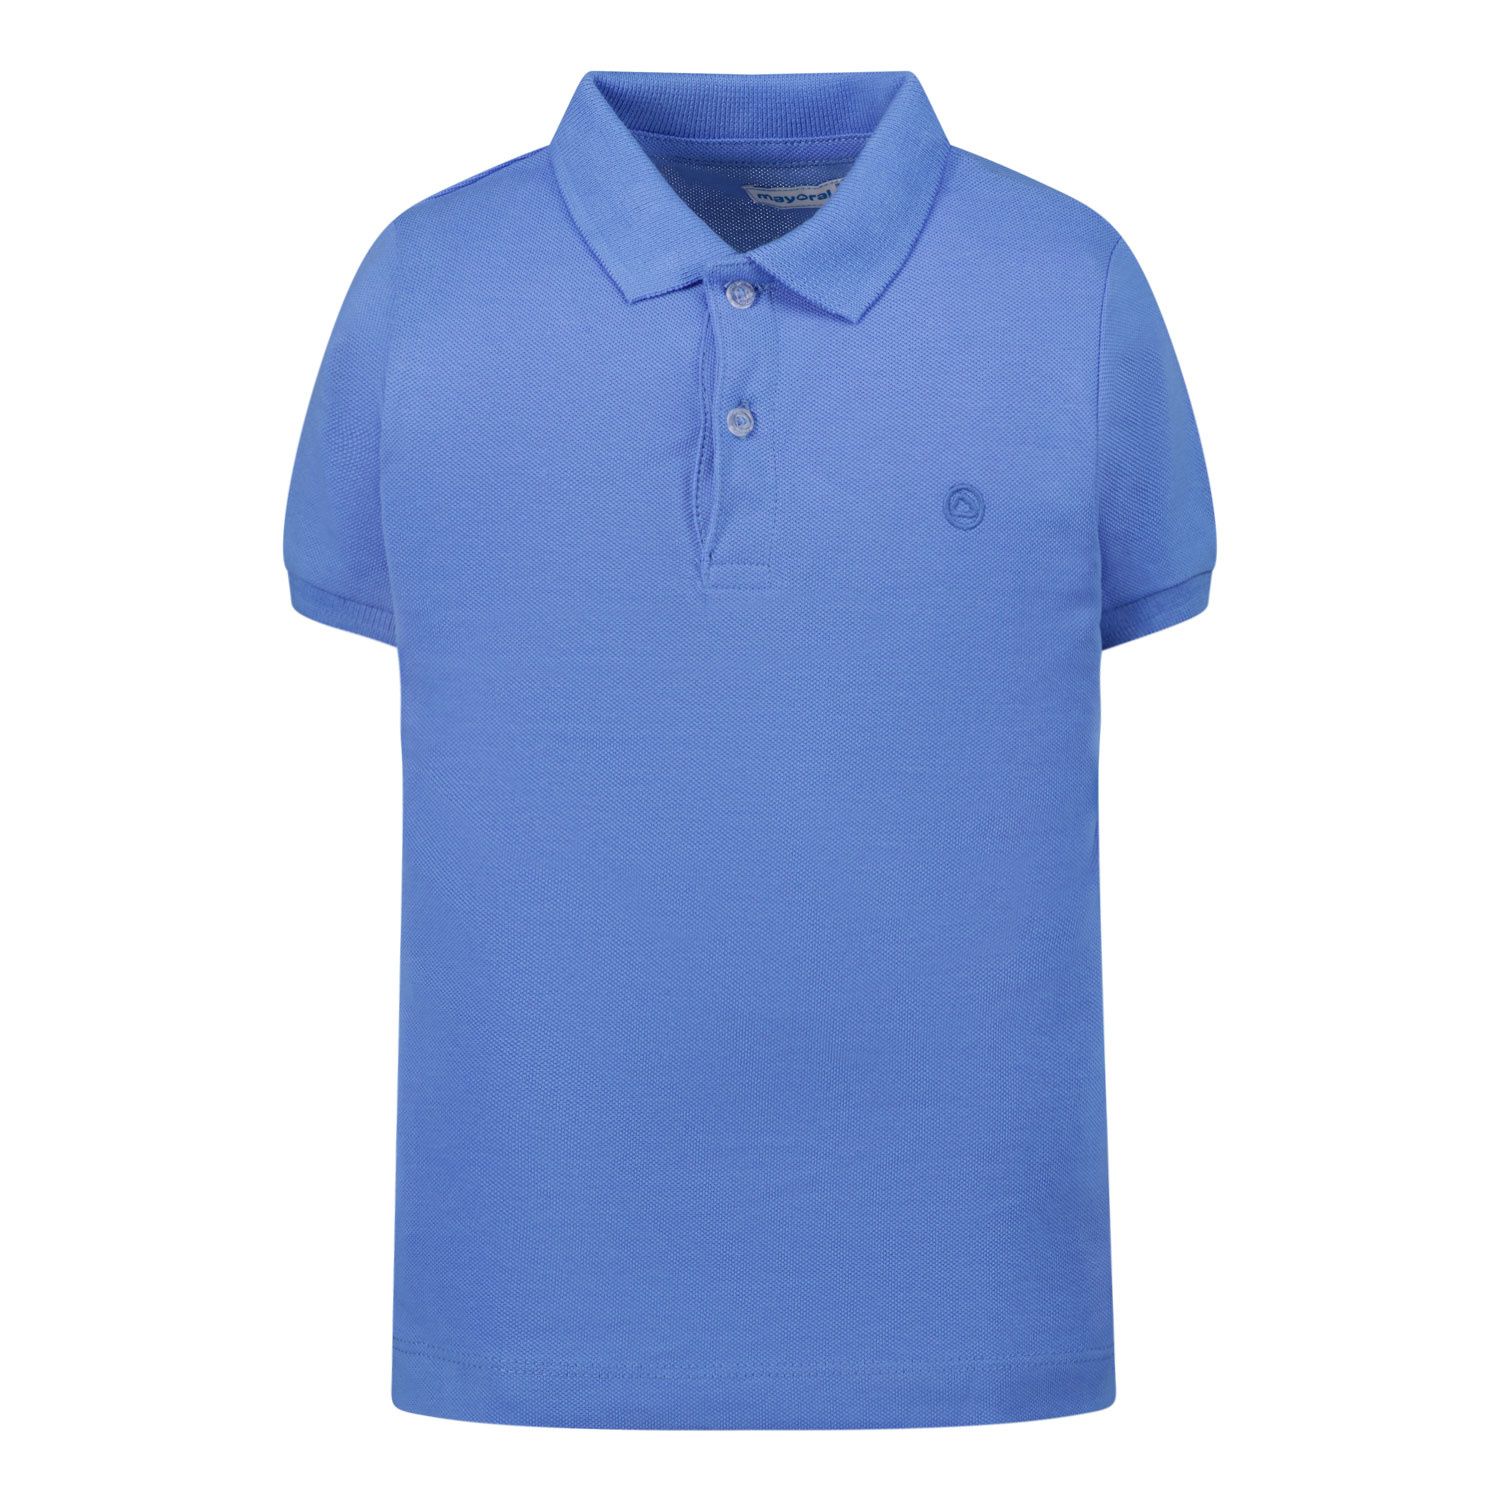 Picture of Mayoral 102 baby poloshirt light blue